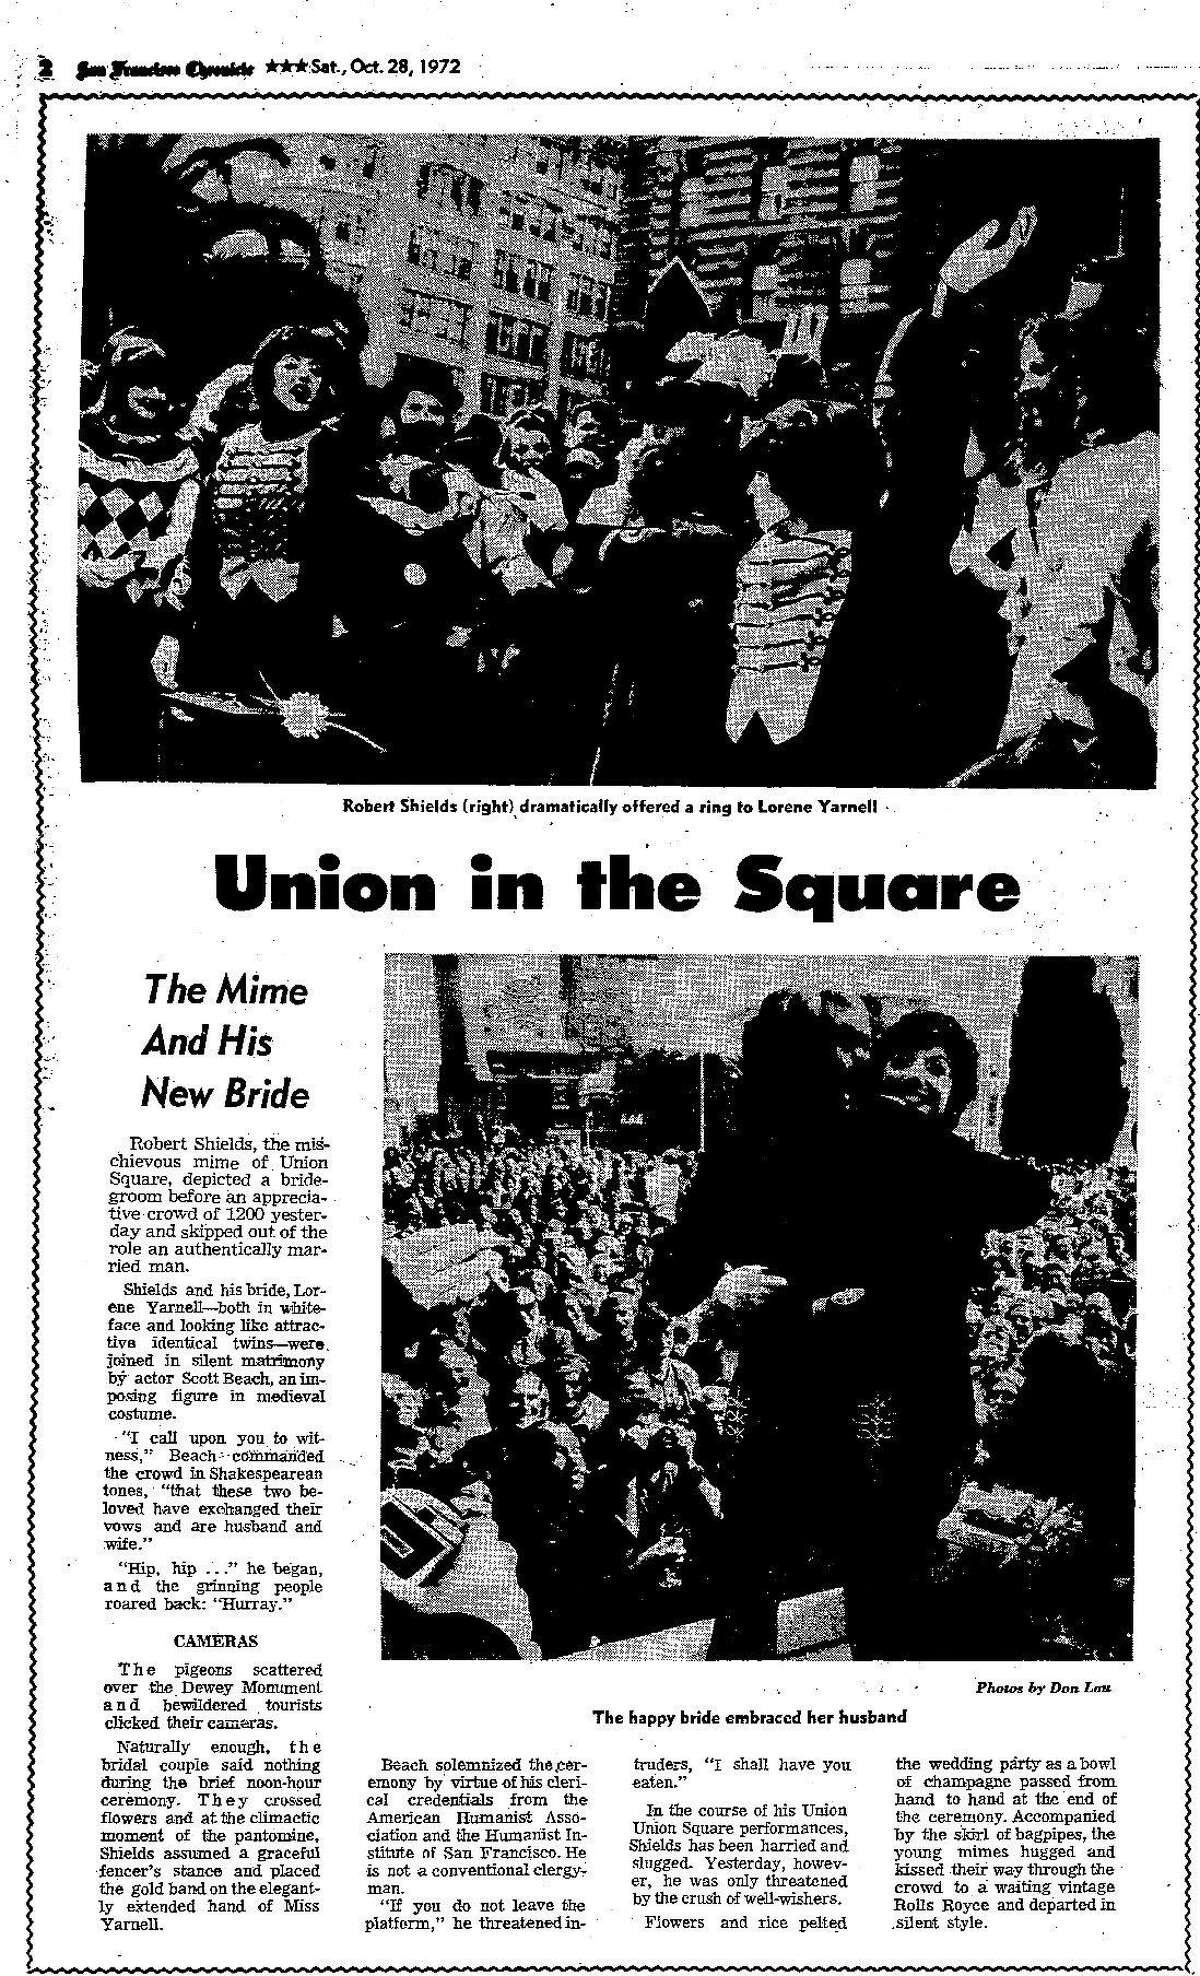 Oct. 28, 1972 Chronicle article on Robert Shields, right, and Lorene Yarnell marrying in Union Square.